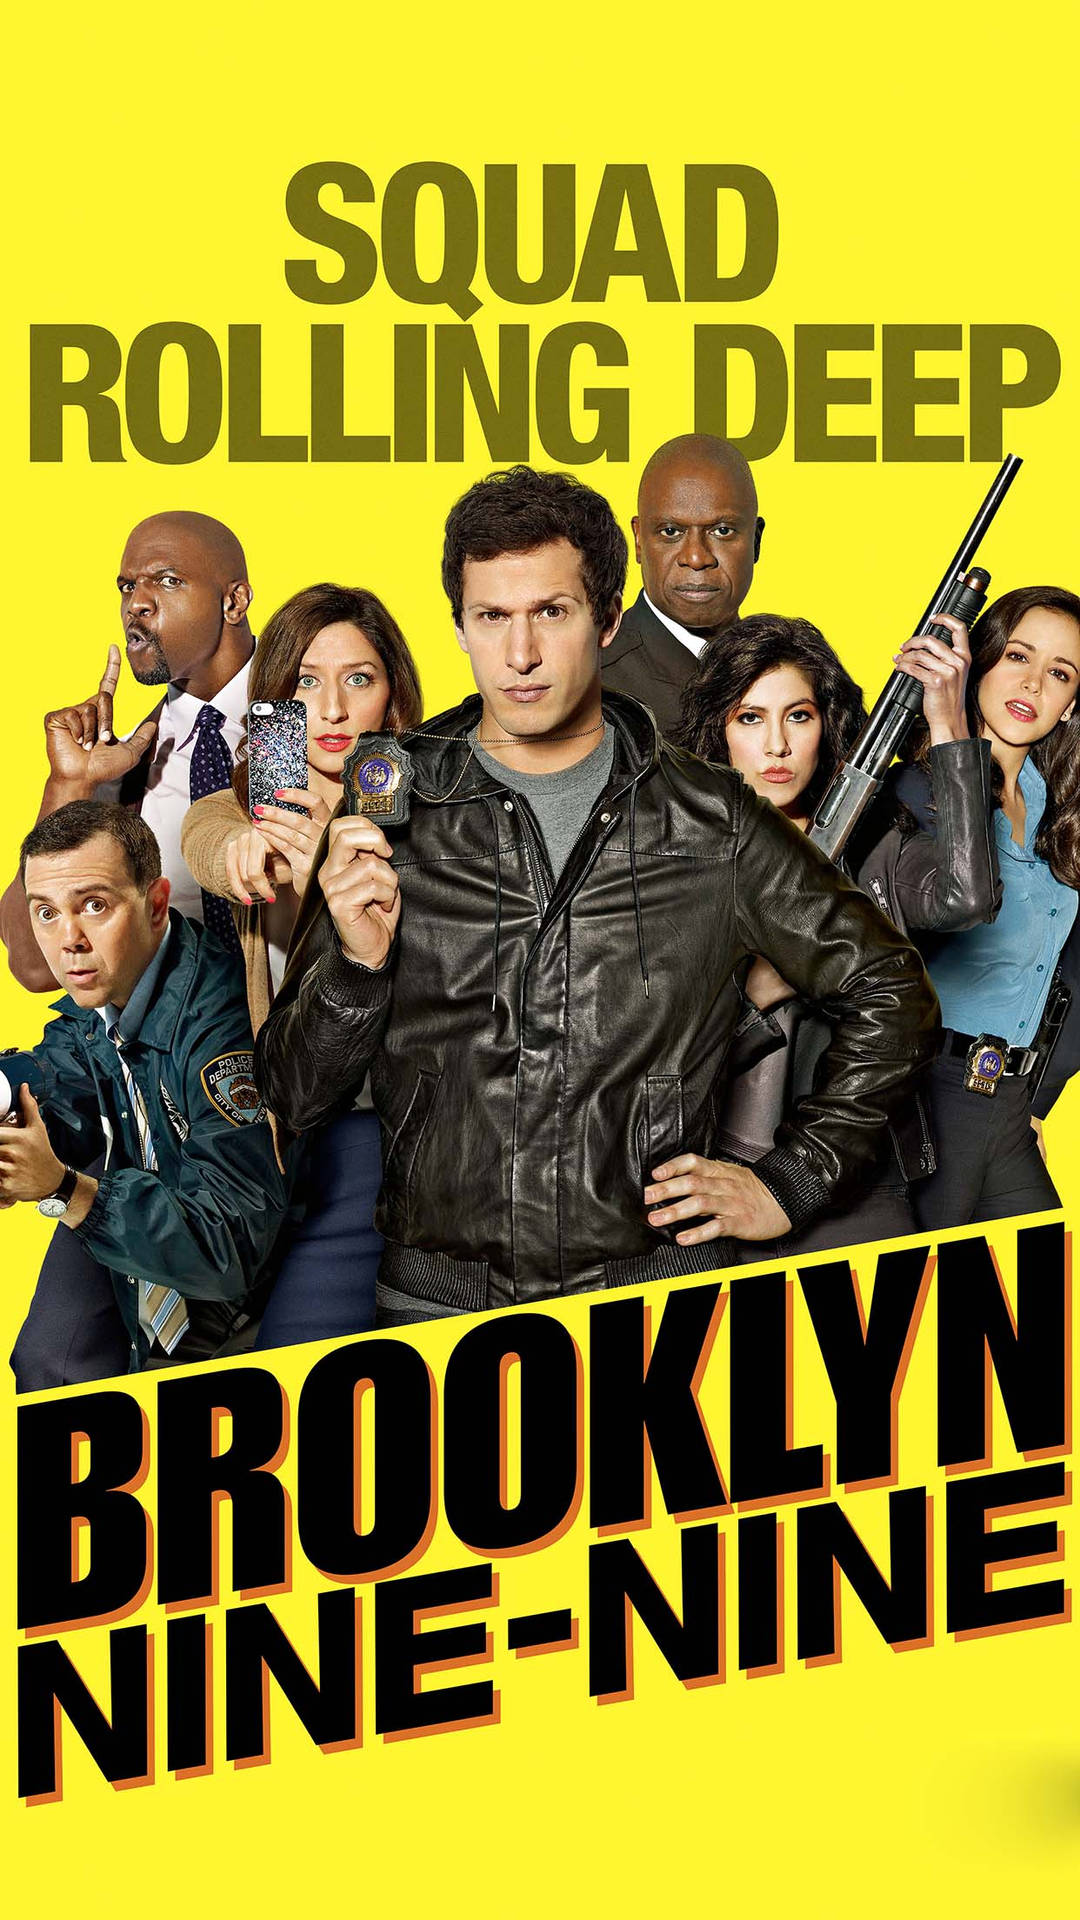 The Squad From Brooklyn Nine Nine Rolling Deep Background